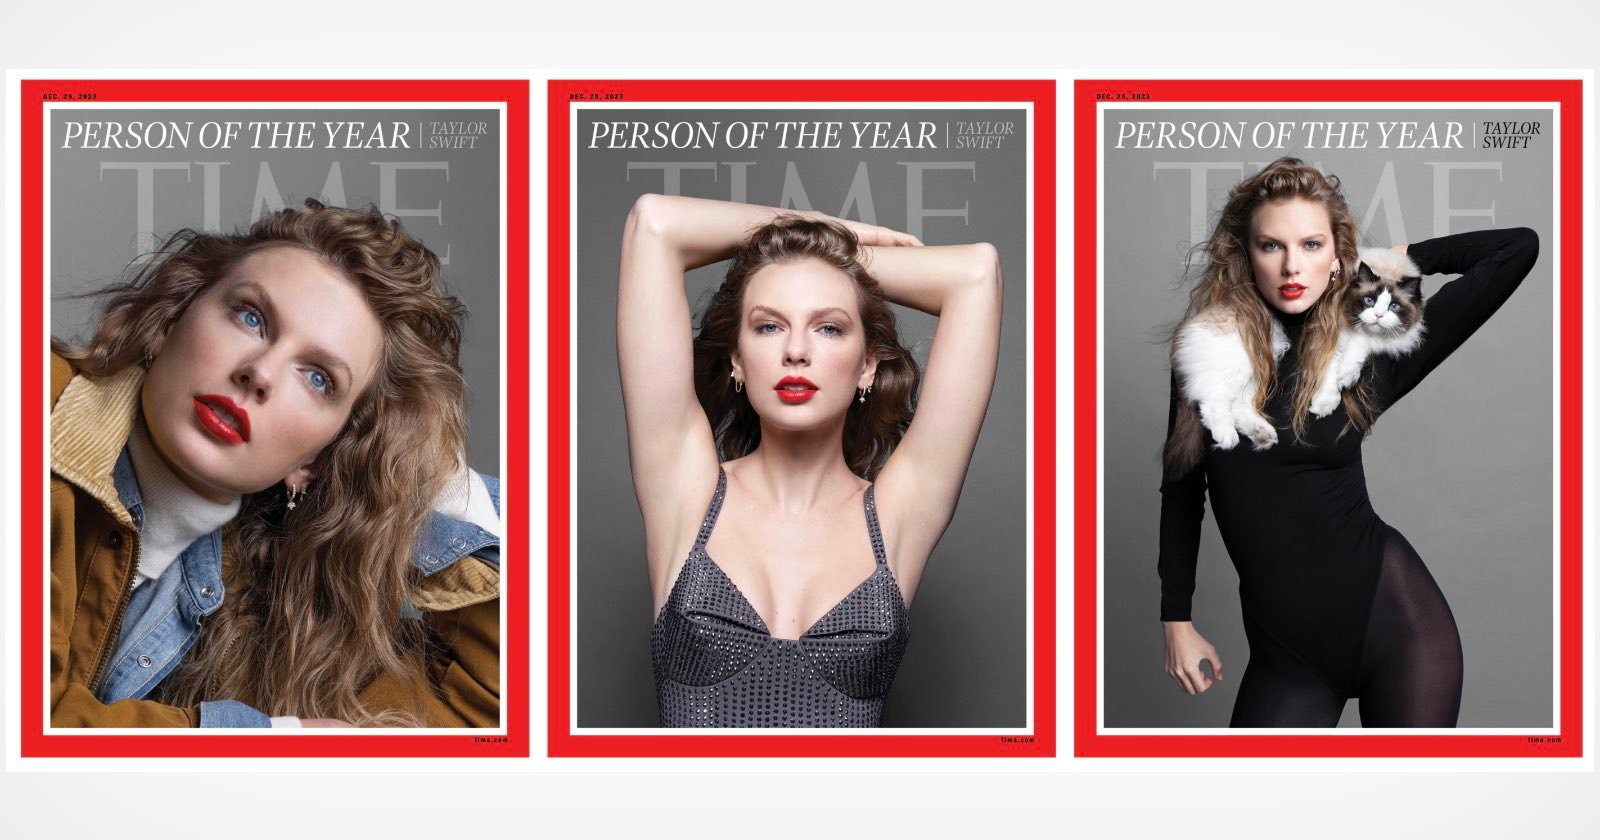 Photographers Reveal Story Behind Taylor Swifts TIME Person of the Year Covers